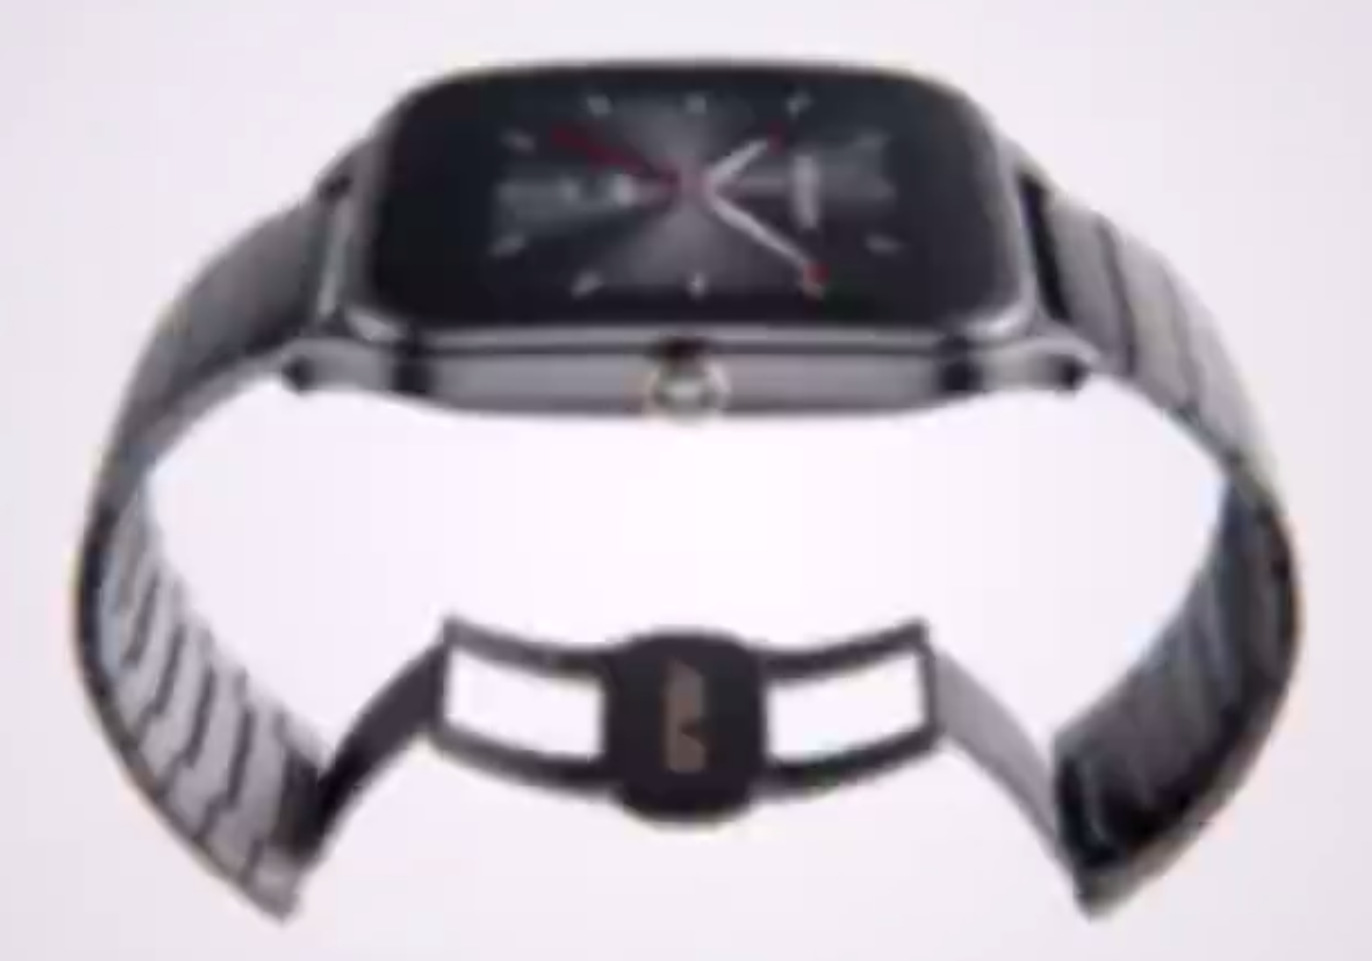 asus watch